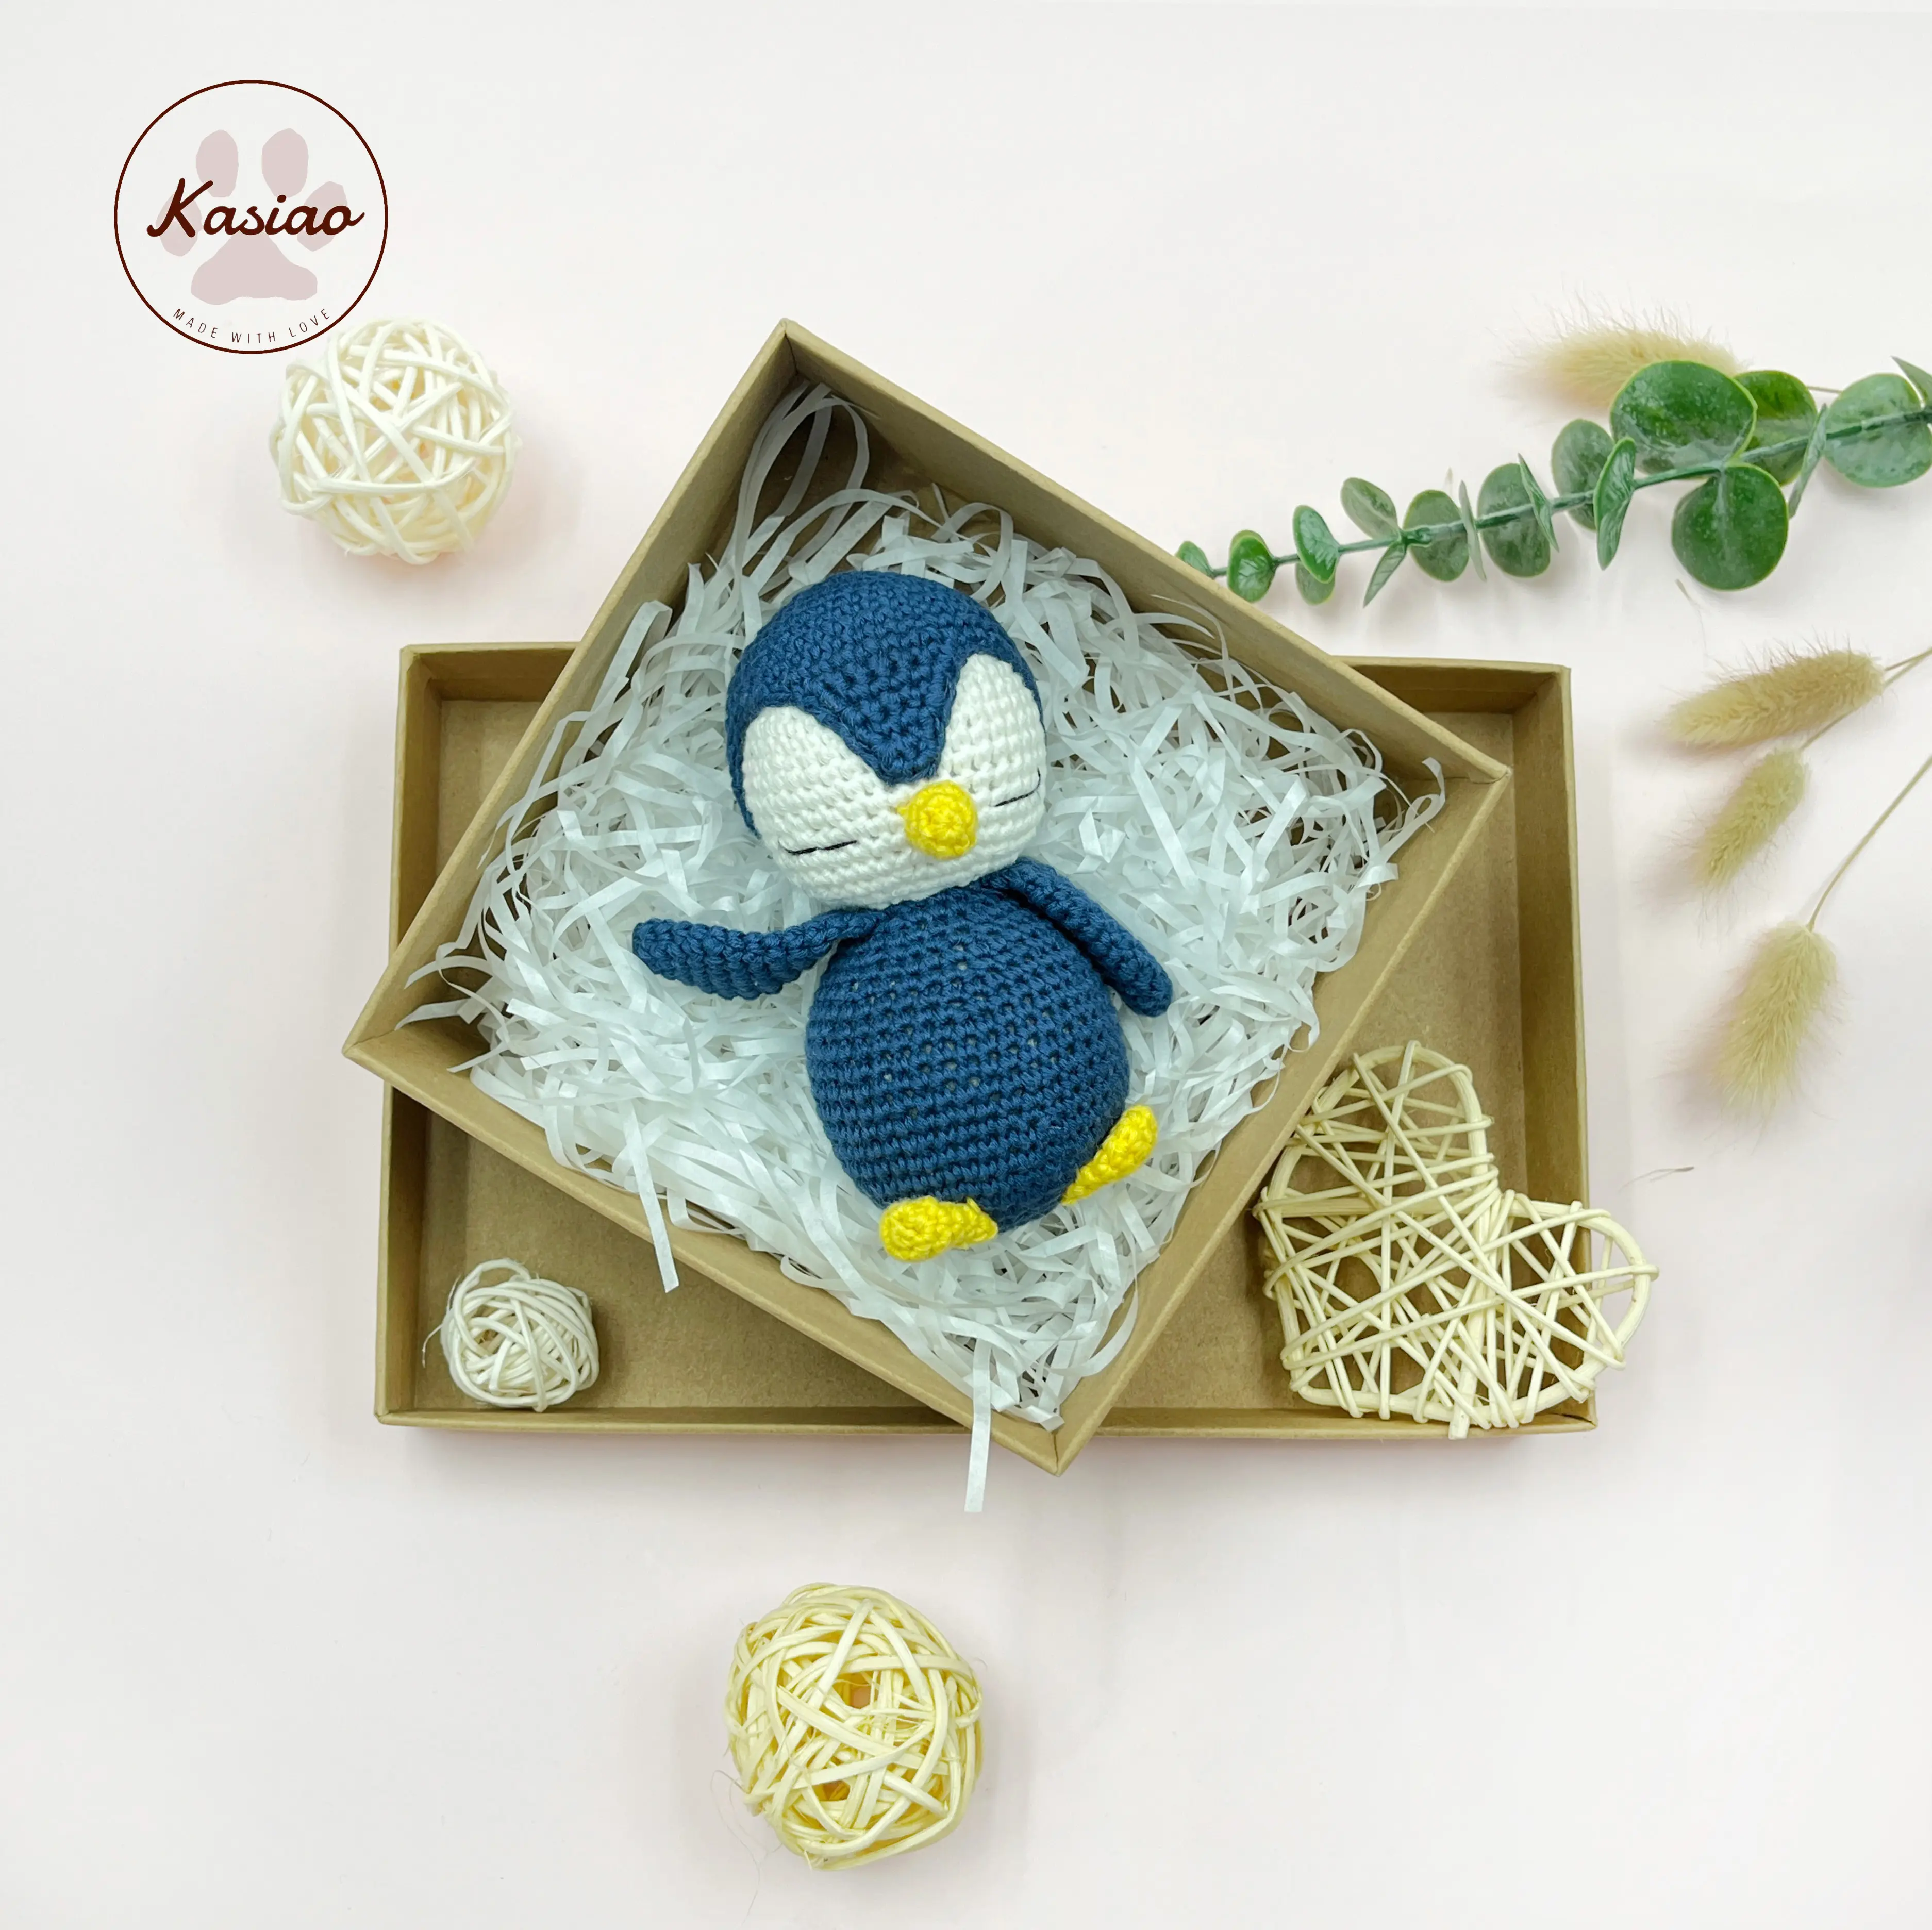 Handcraft Crocheted Craft Toys Handmade Cotton Knit Weave Penguin Kit Doll Toy For Kids Educational Knitting Toy